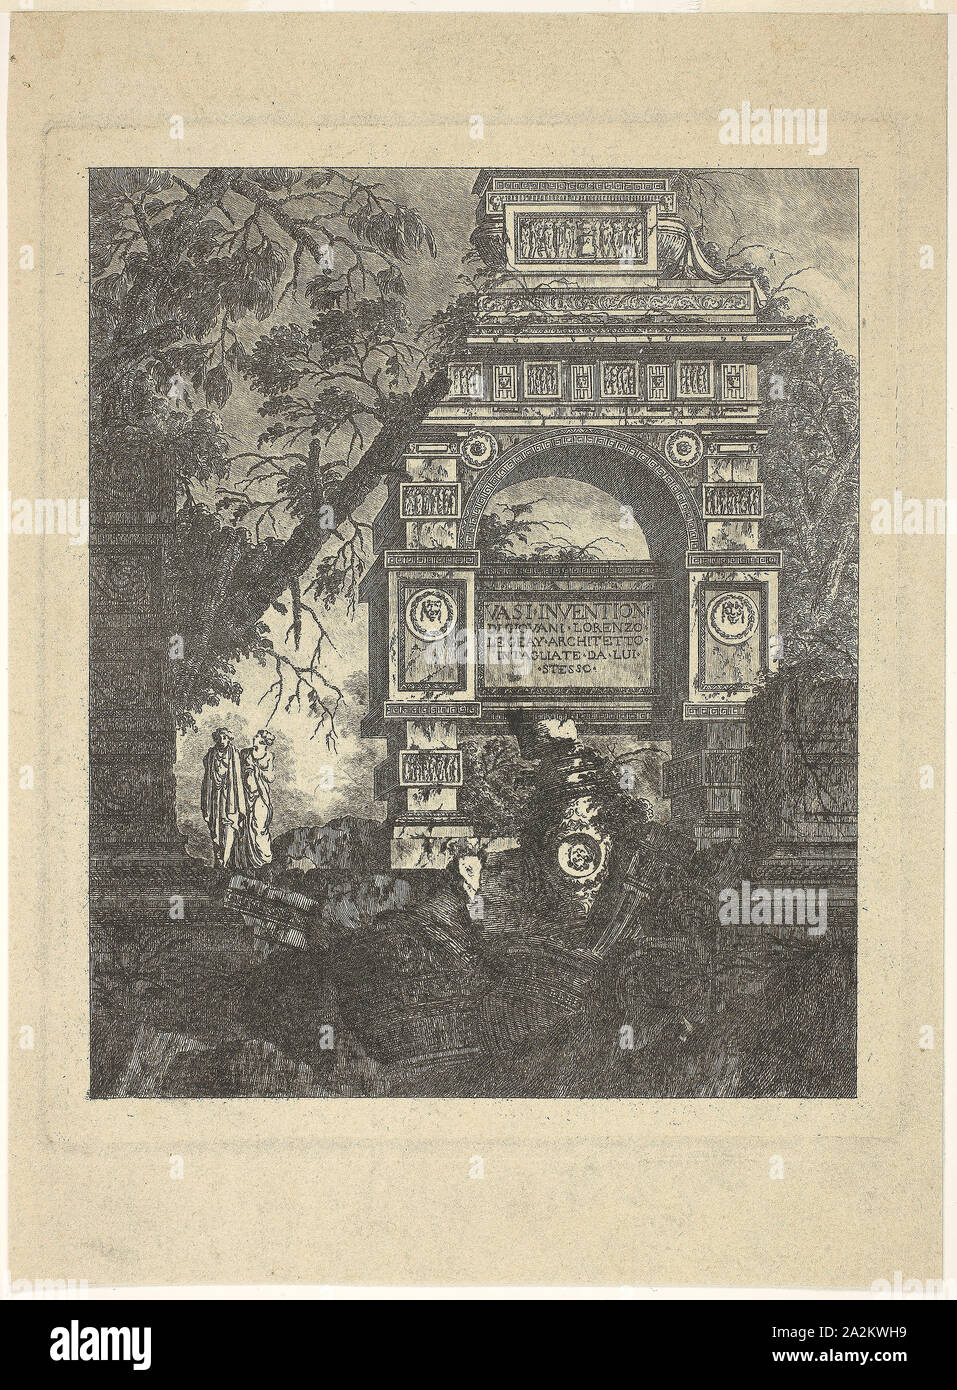 Frontispiece, plate one from Vasi Invention, 1768, published 1770, Jean-Laurent Legeay, French, 1710-1786, France, Etching with drypoint on tan laid paper, 226 × 186 mm (image), 248 × 208 mm (plate), 309 × 228 mm (sheet Stock Photo